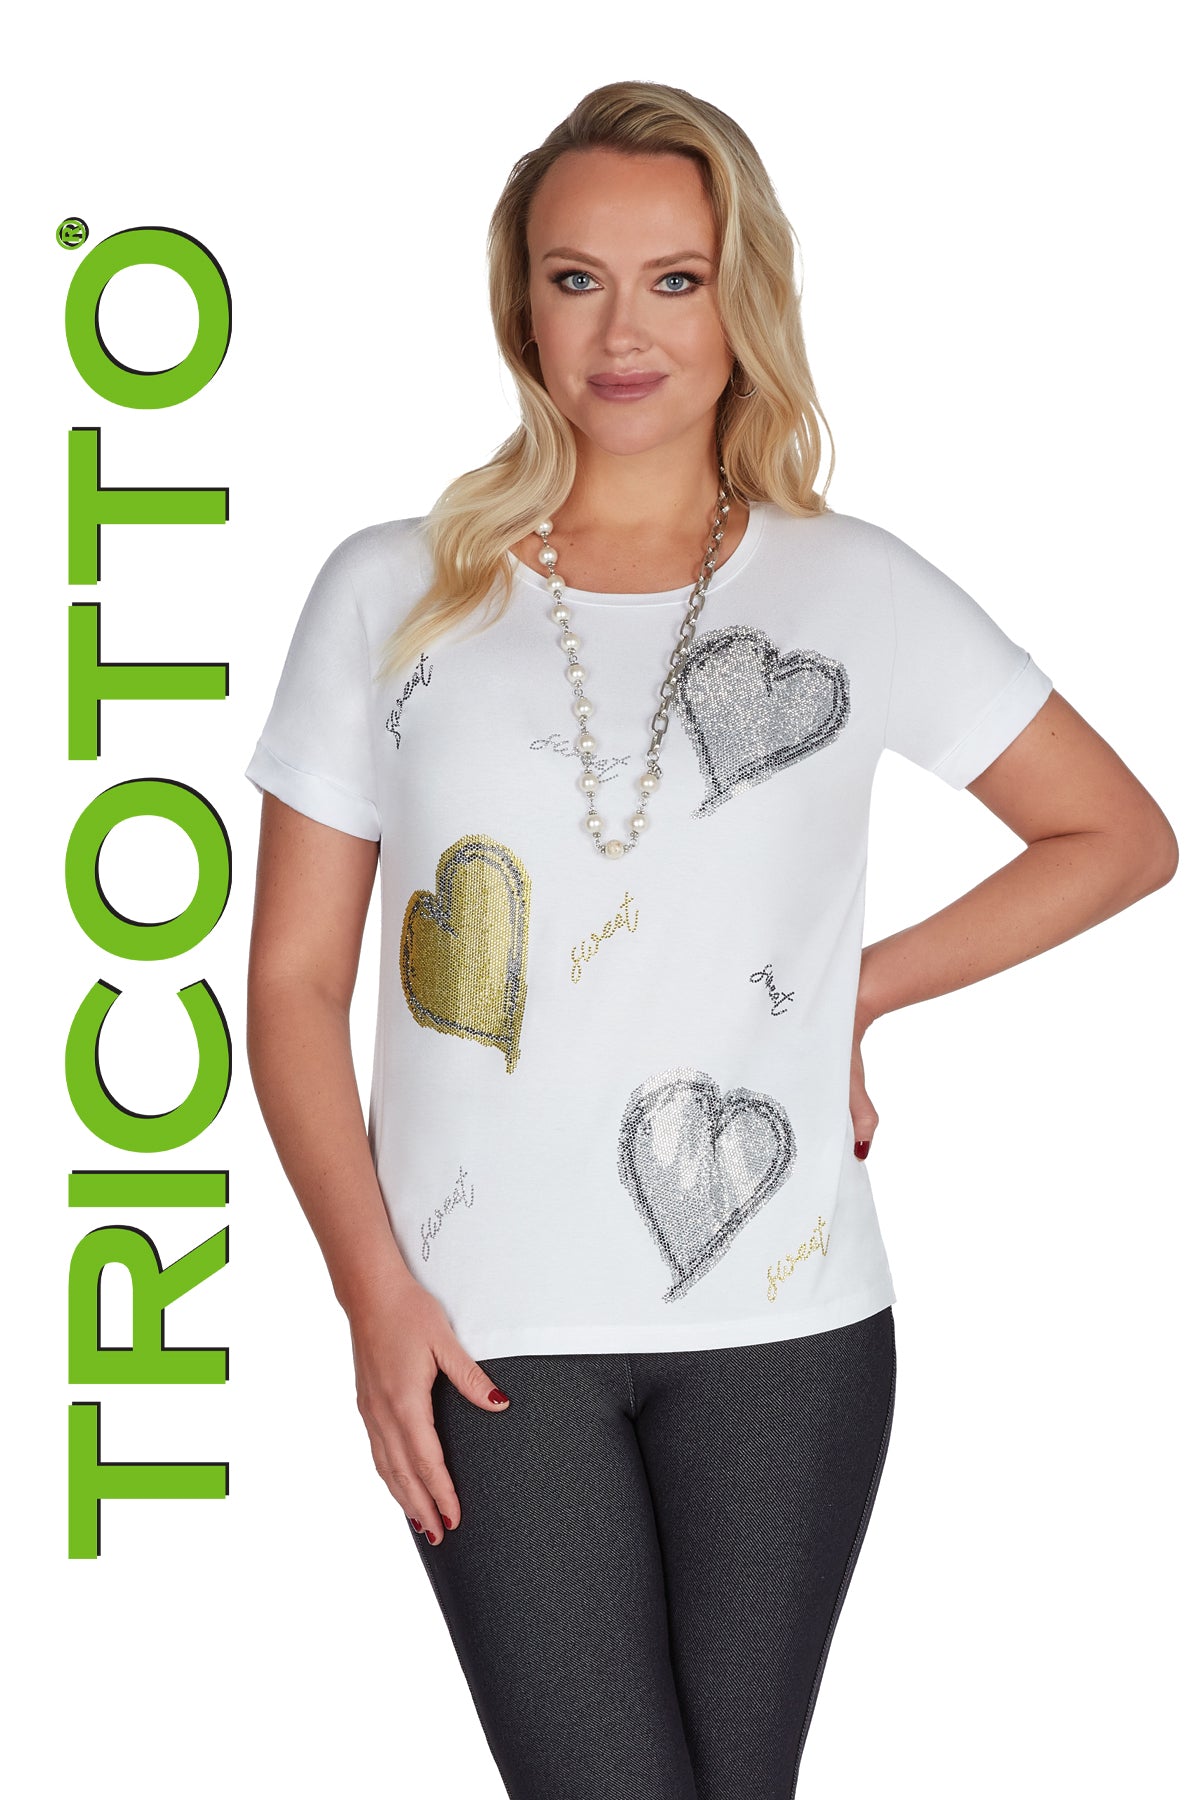 Tricotto T-shirts-Buy Tricotto T-shirts Online-Women's T-shirts Online Canada-Tricotto Clothing Montreal-Tricotto Online T-shirt Shop